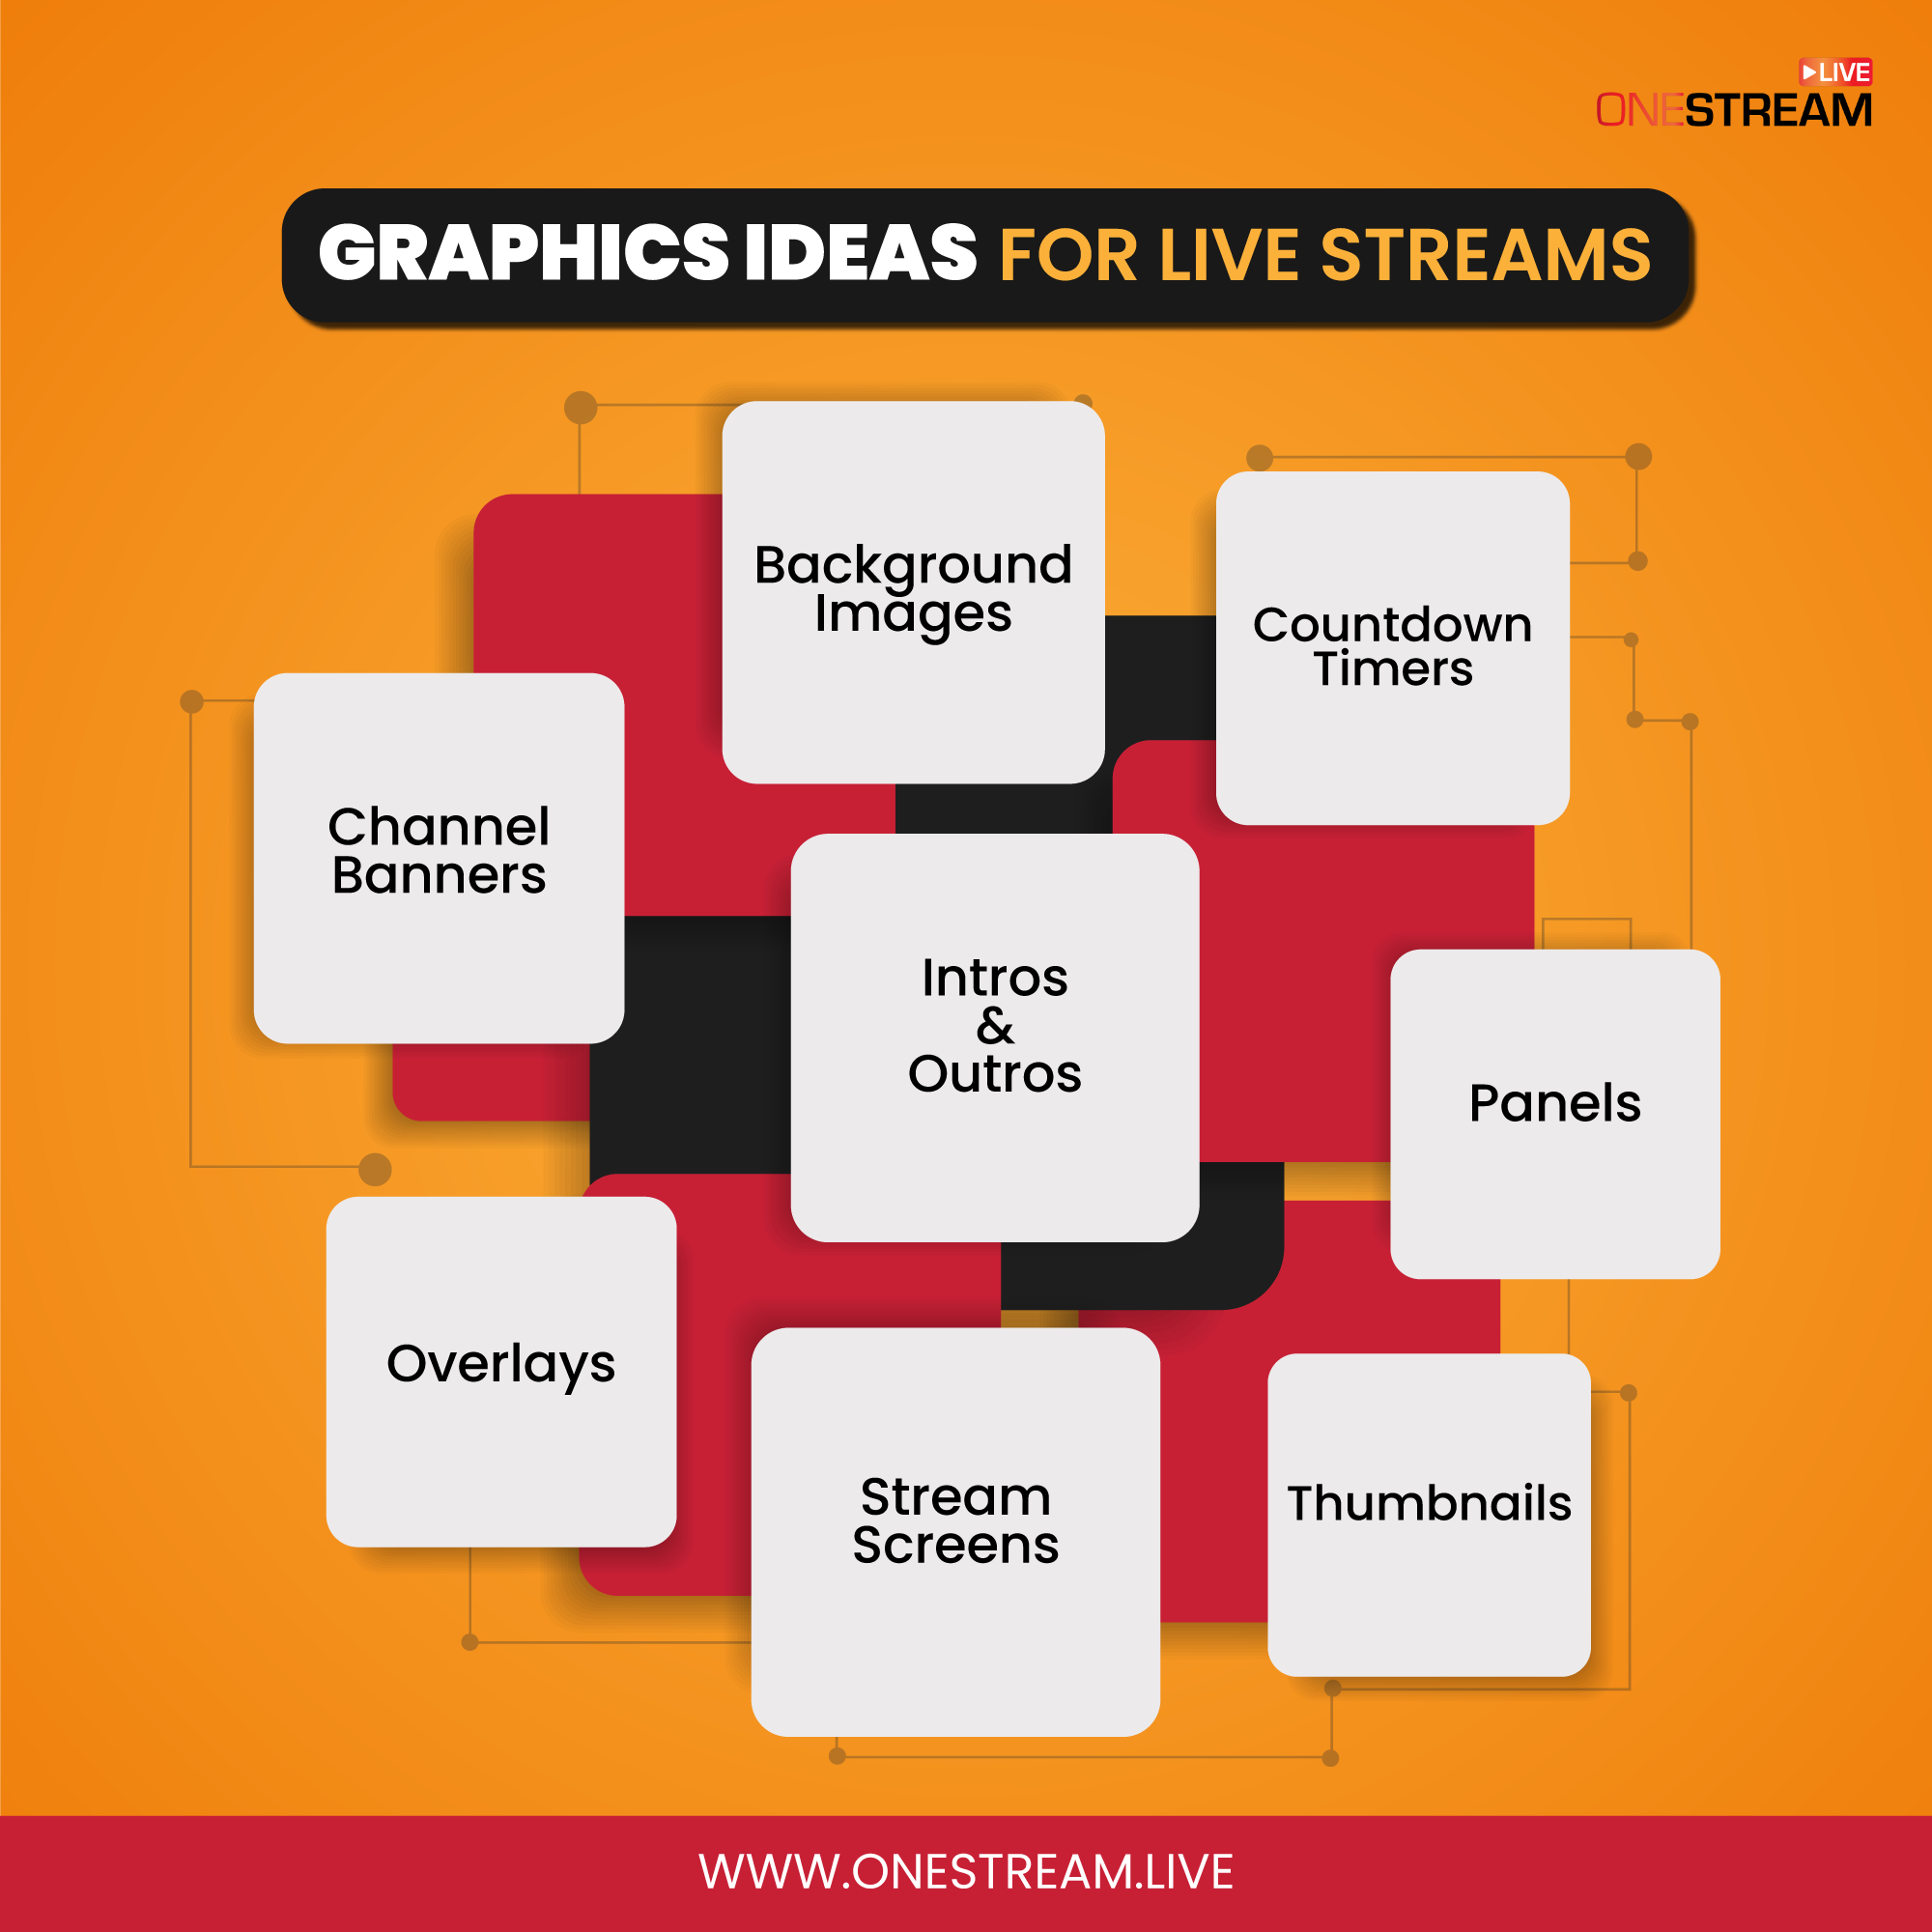 Professional graphic designs for live streams